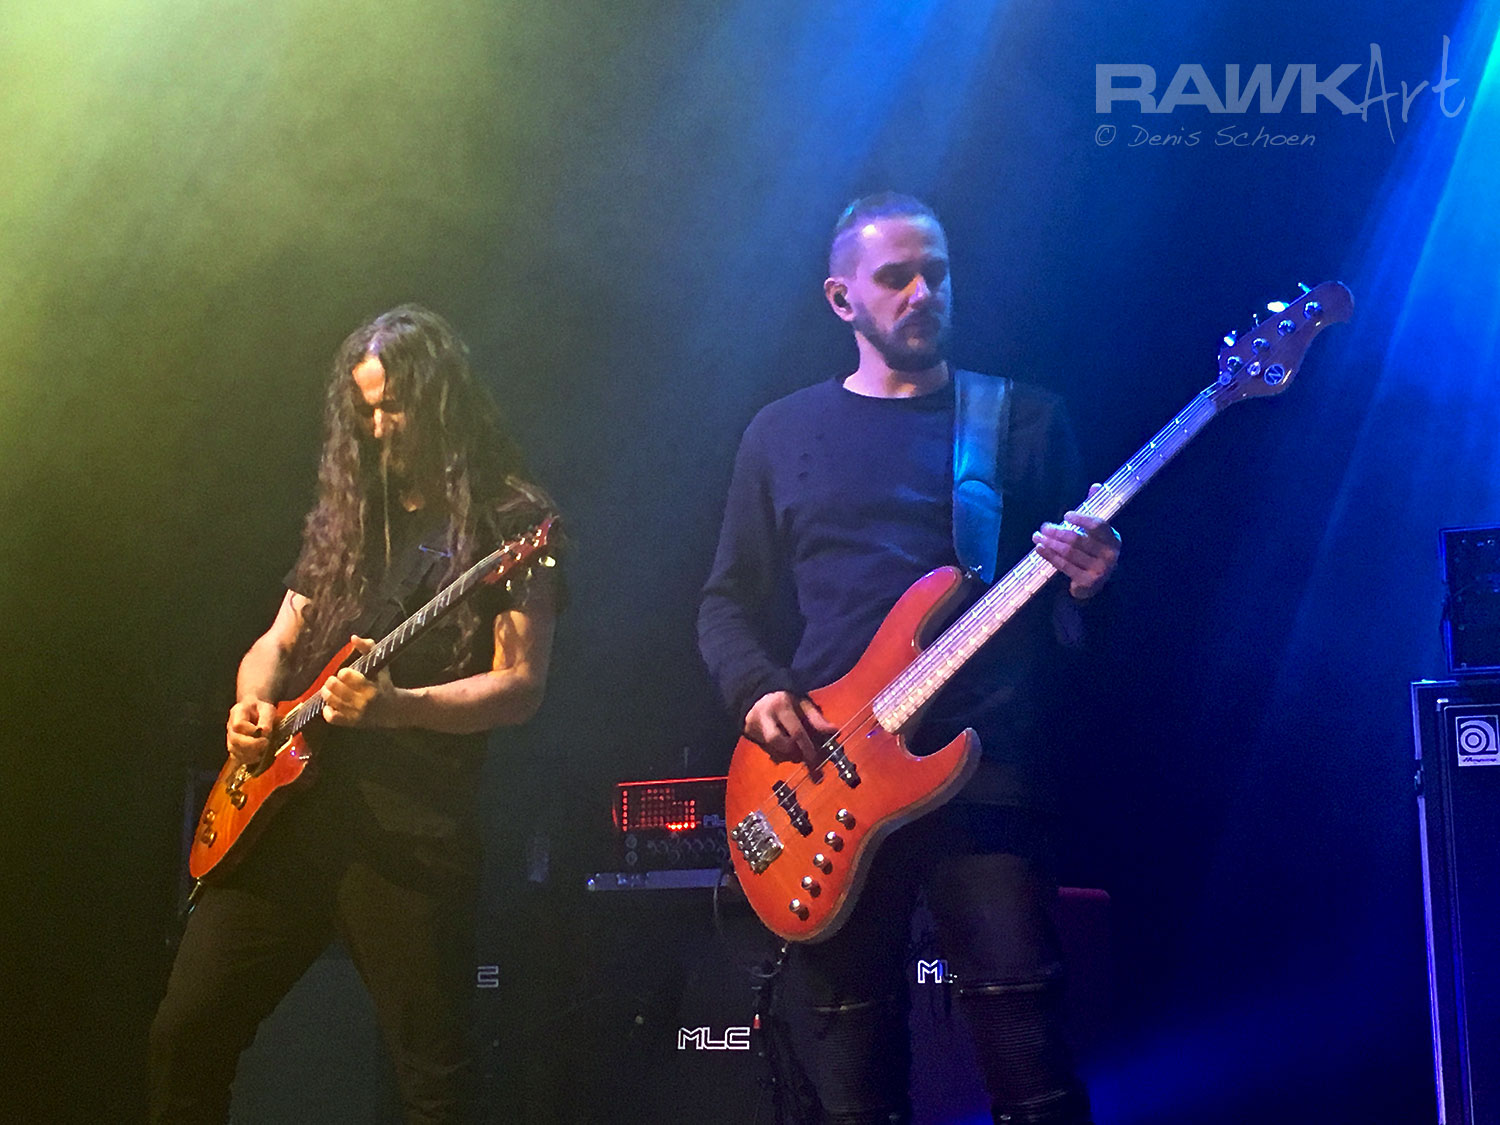 Riverside at Hedon Grote Zaal, Zwolle, Netherlands, Towards the Blue Horizon Tour 2017